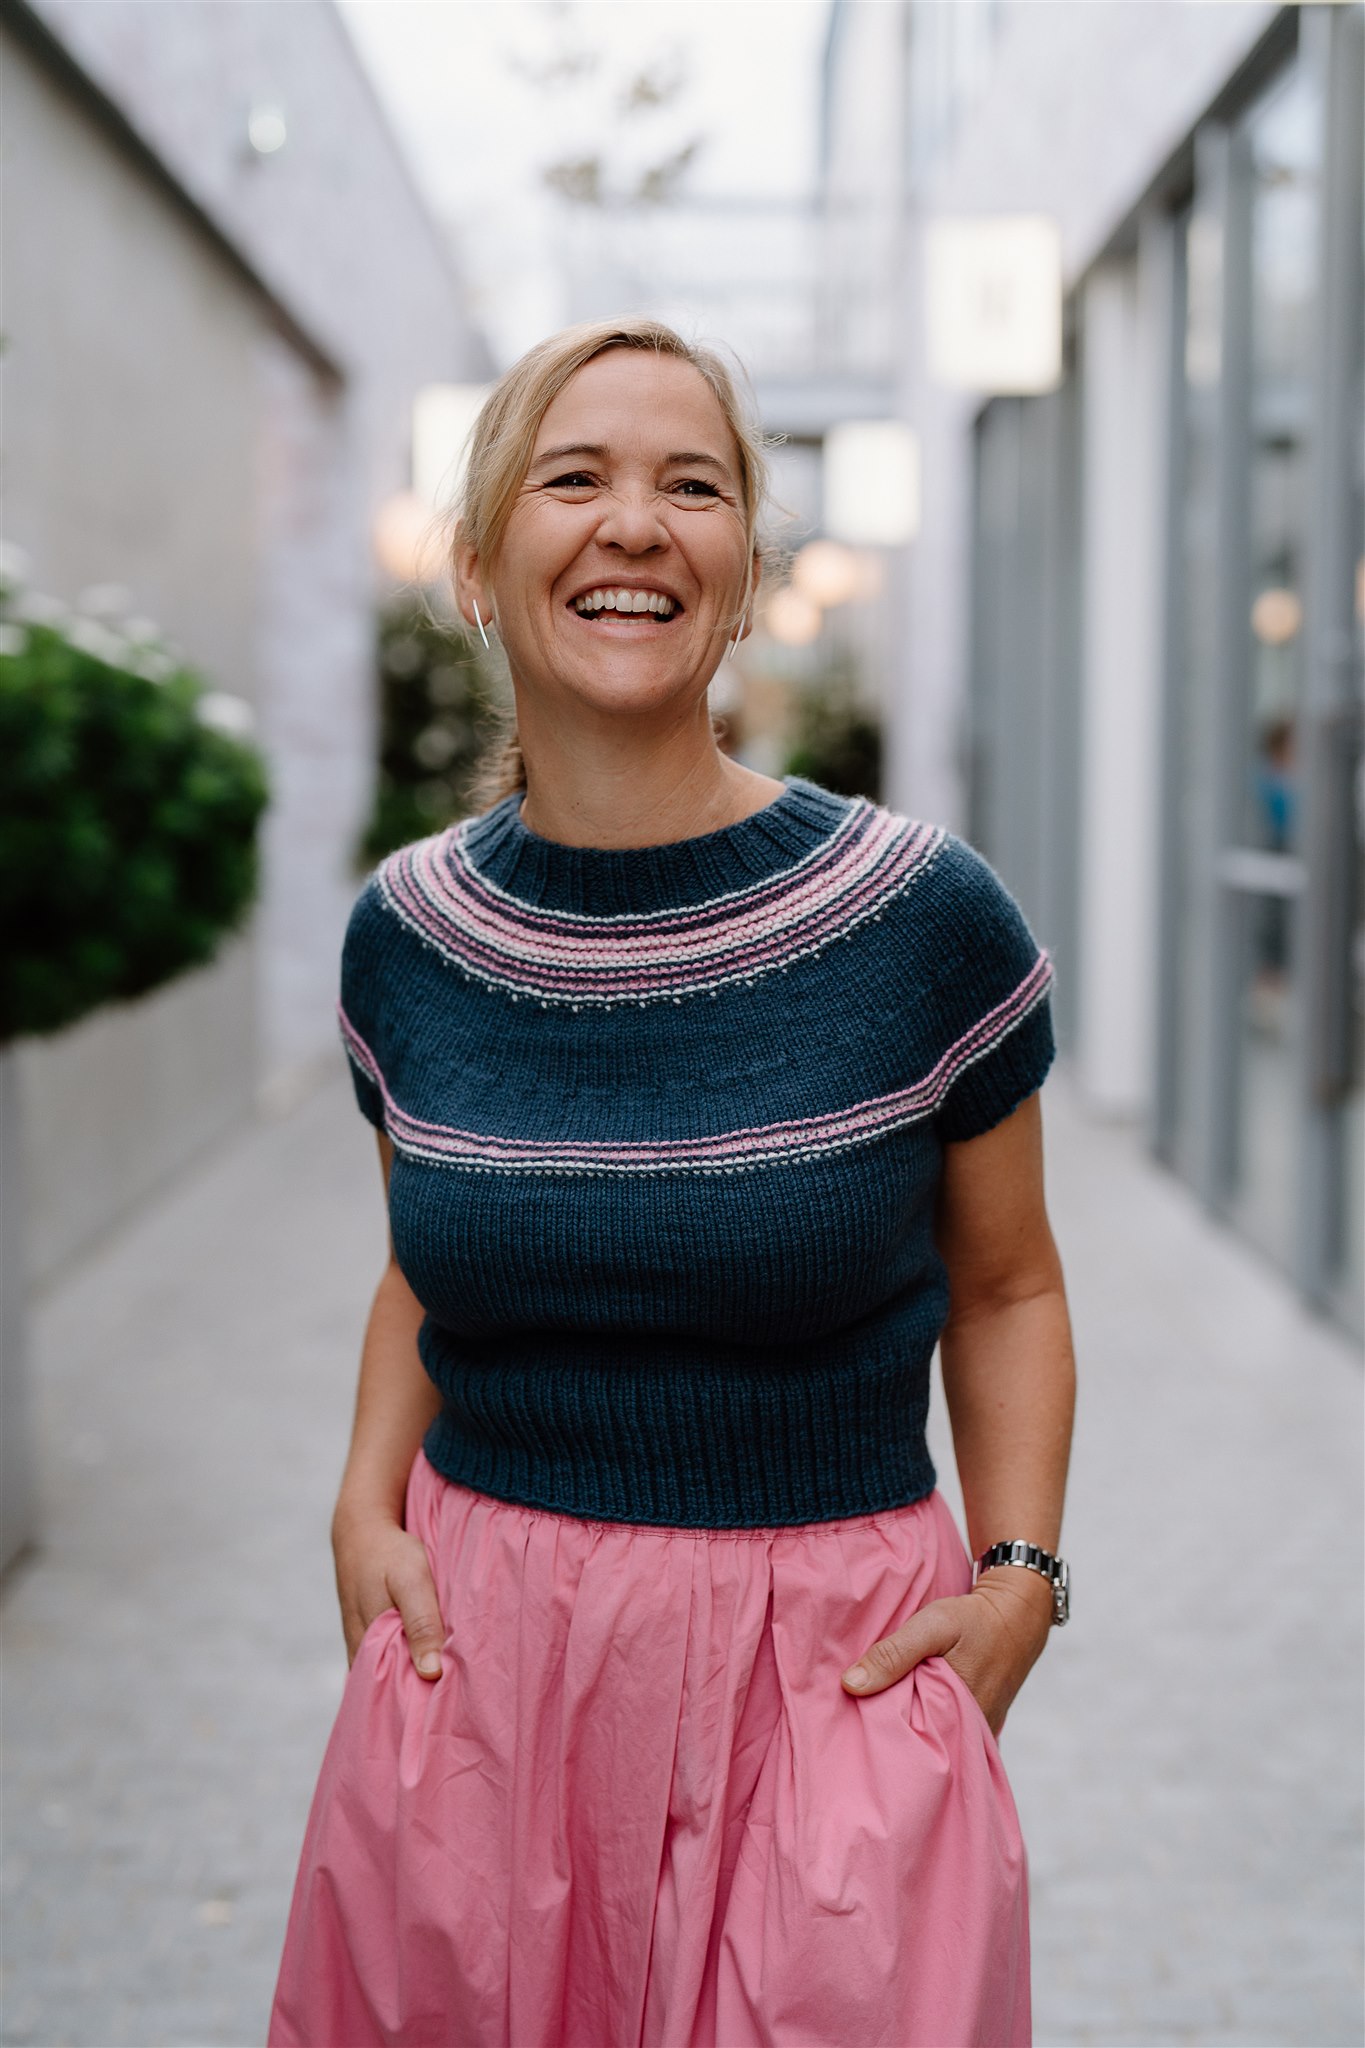 A Monique Knitted Top by The Woven Co